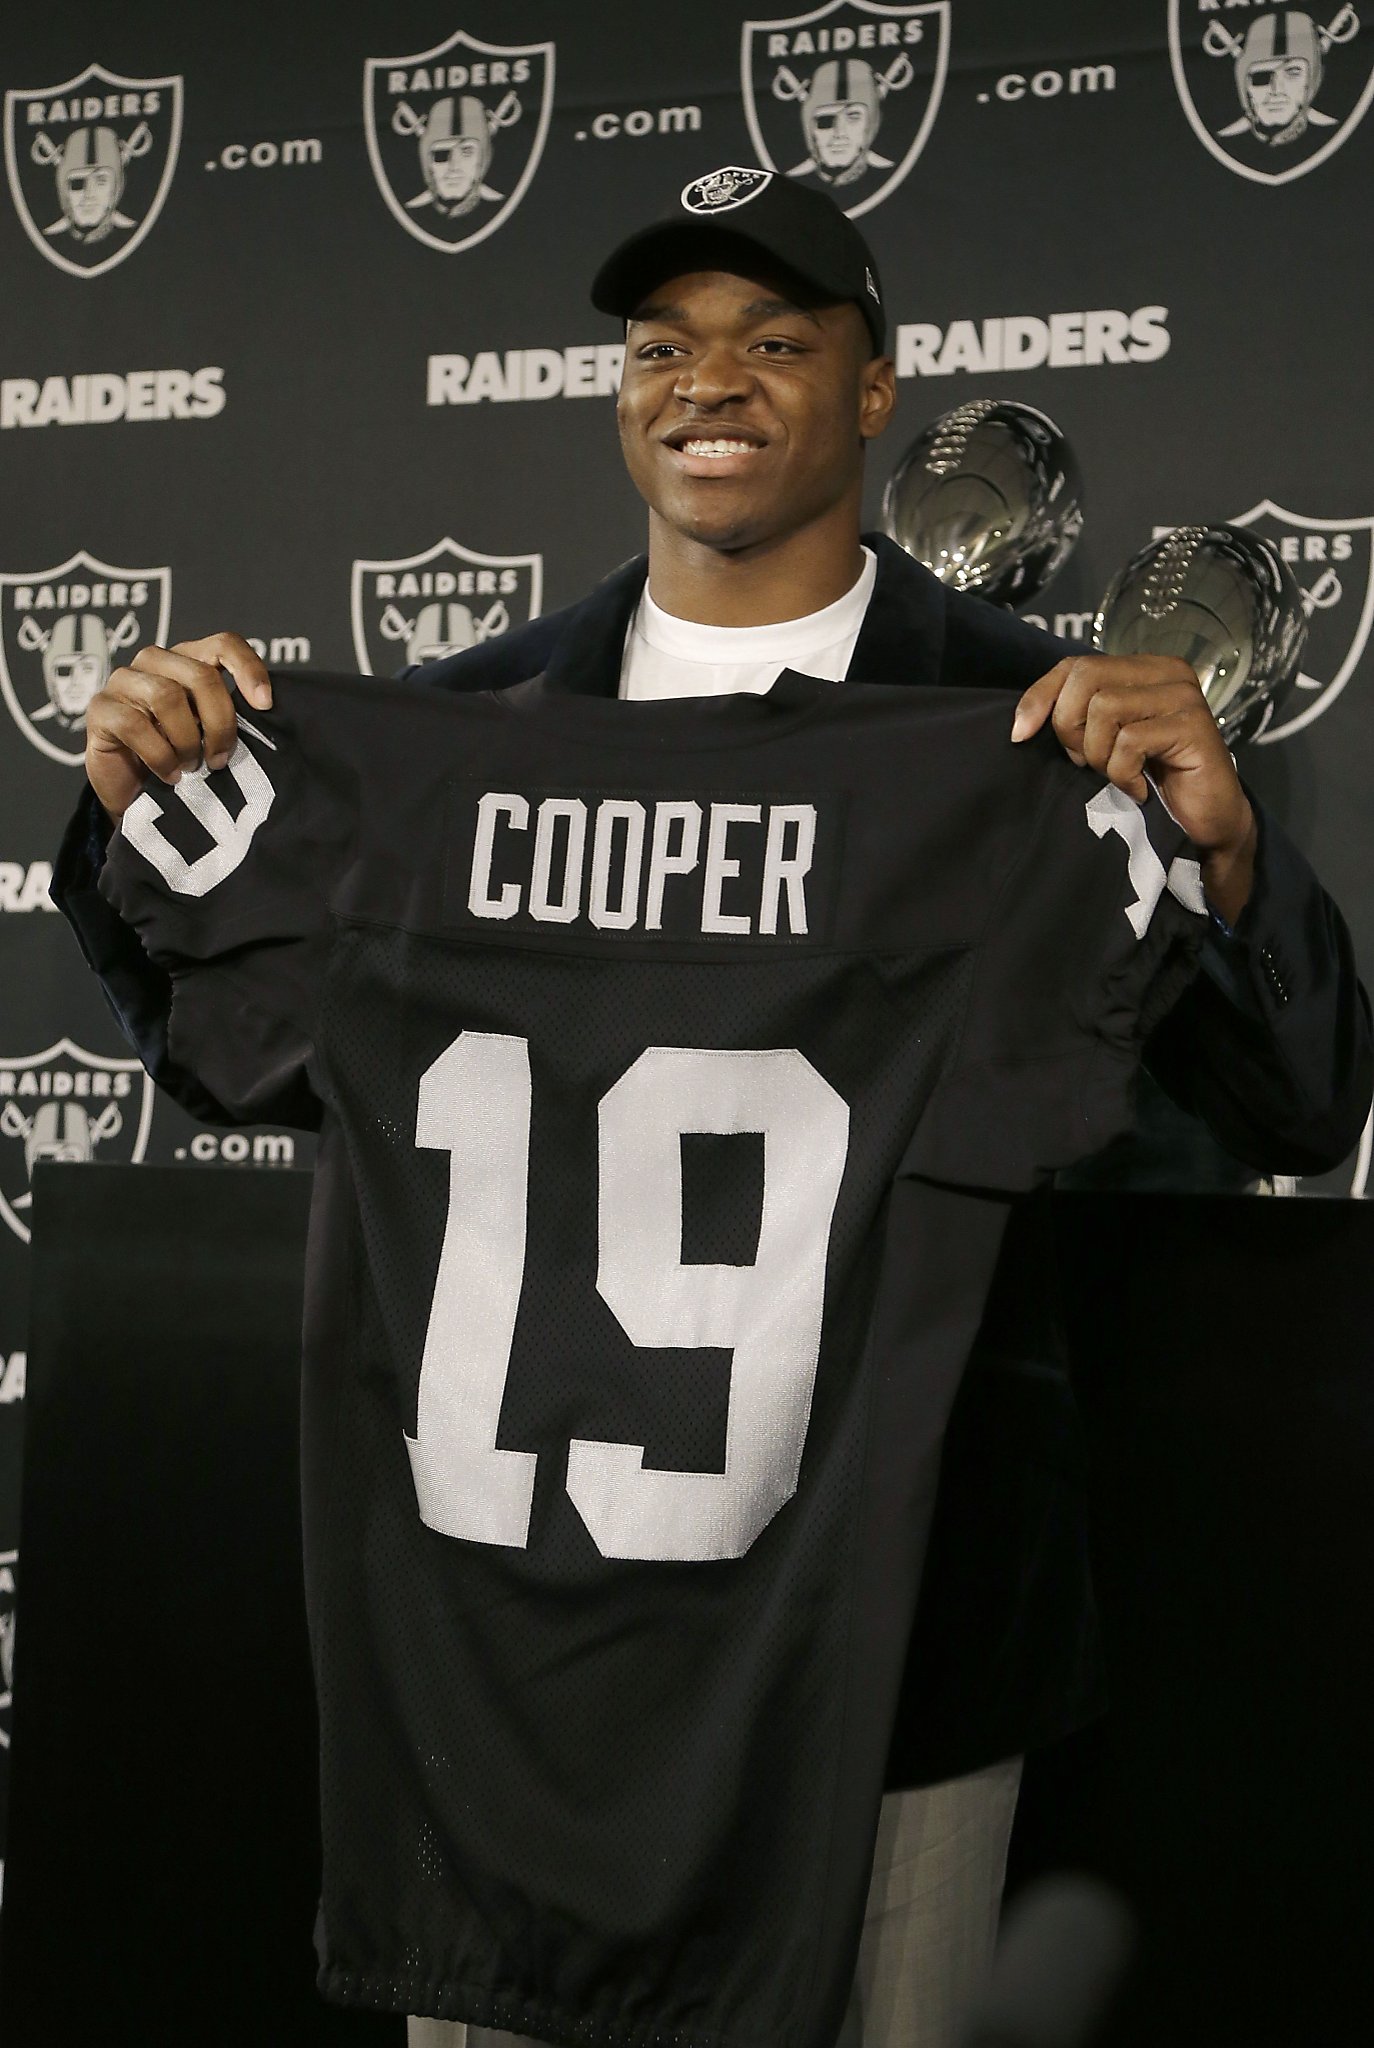 Raiders' top pick Cooper is all business, all the time